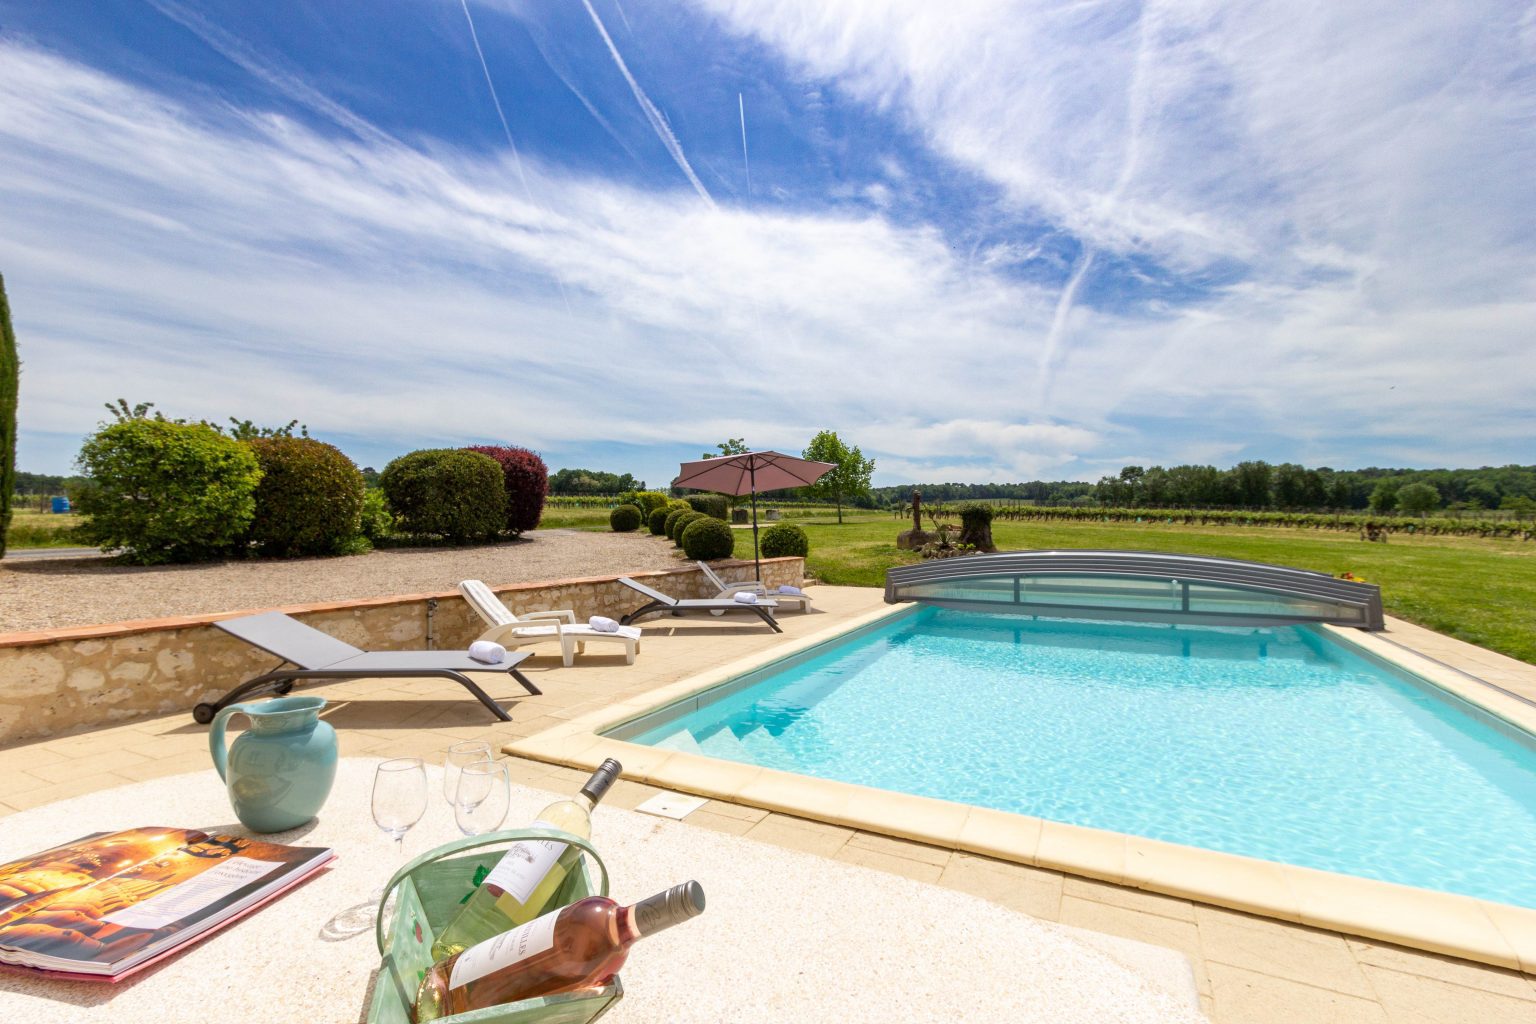 Jubin holiday villa in sw France with a private secure pool, near Duras and Monsegur